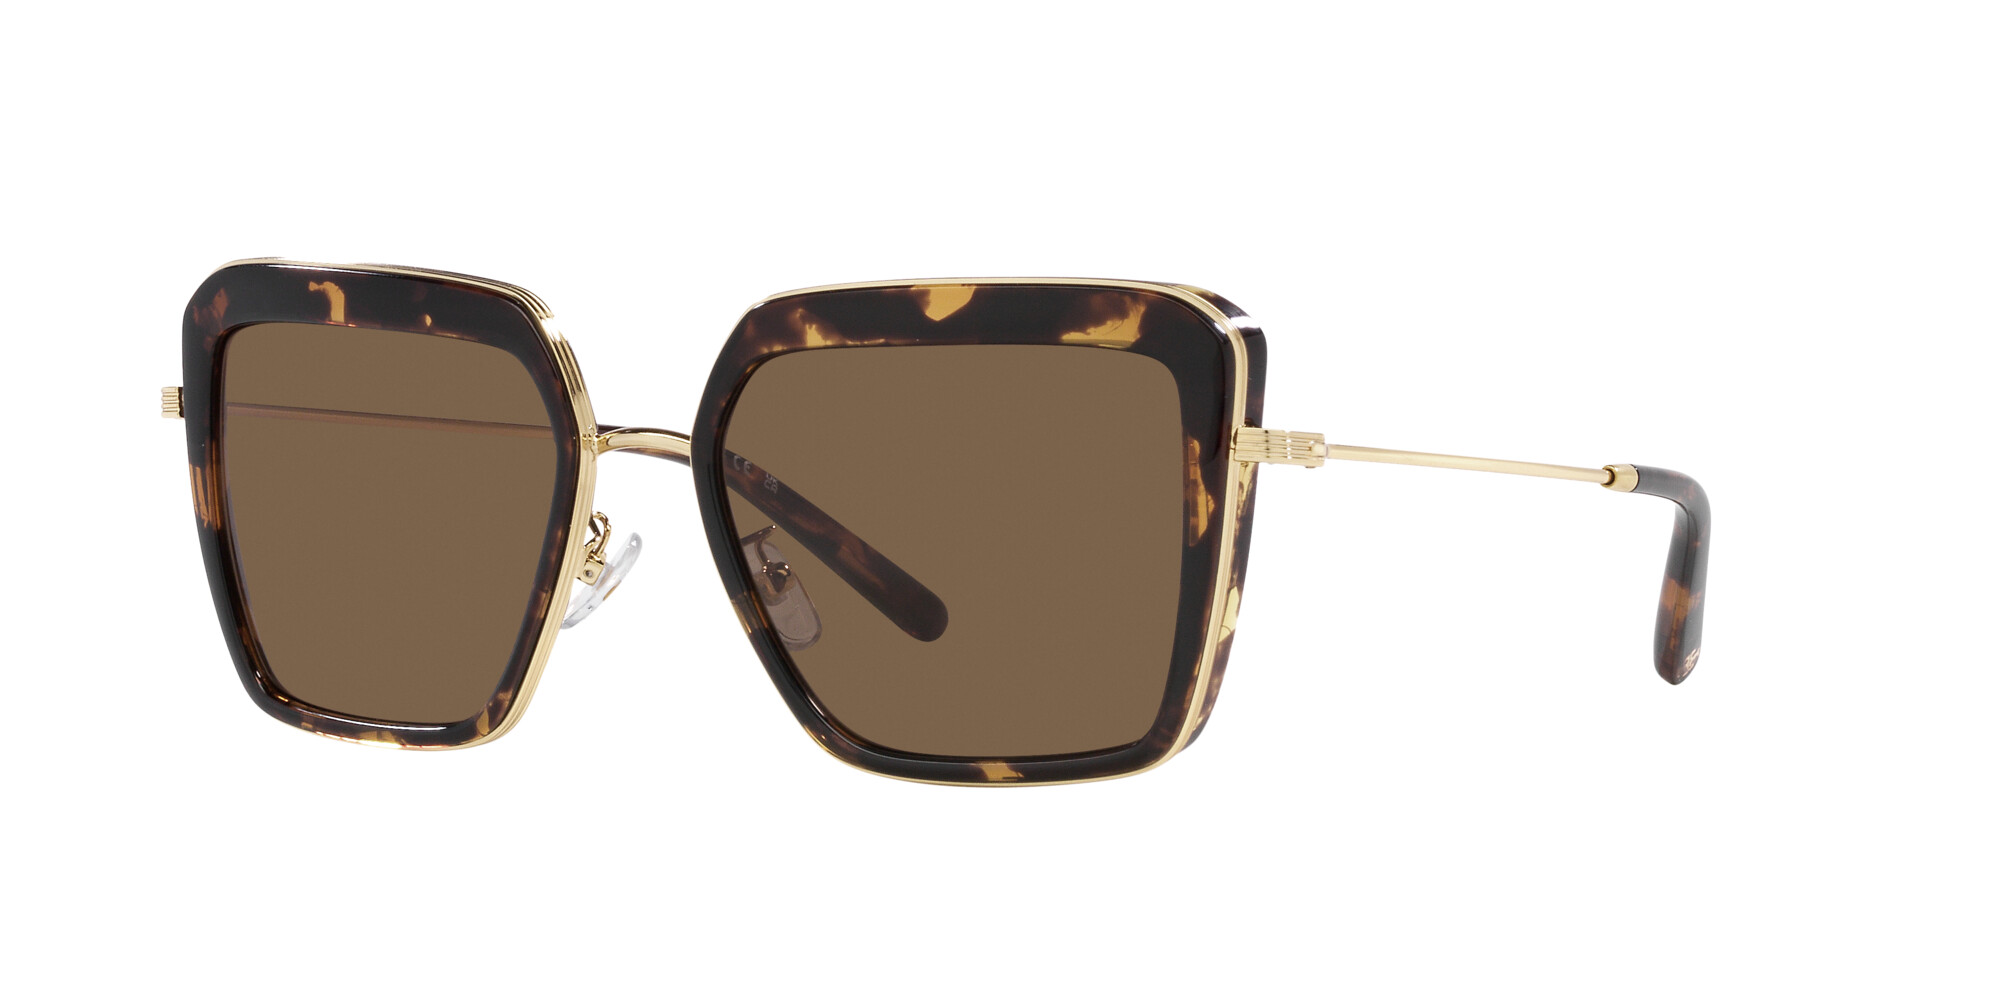 [products.image.angle_left01] Tory Burch 0TY6099 336373 Sonnenbrille